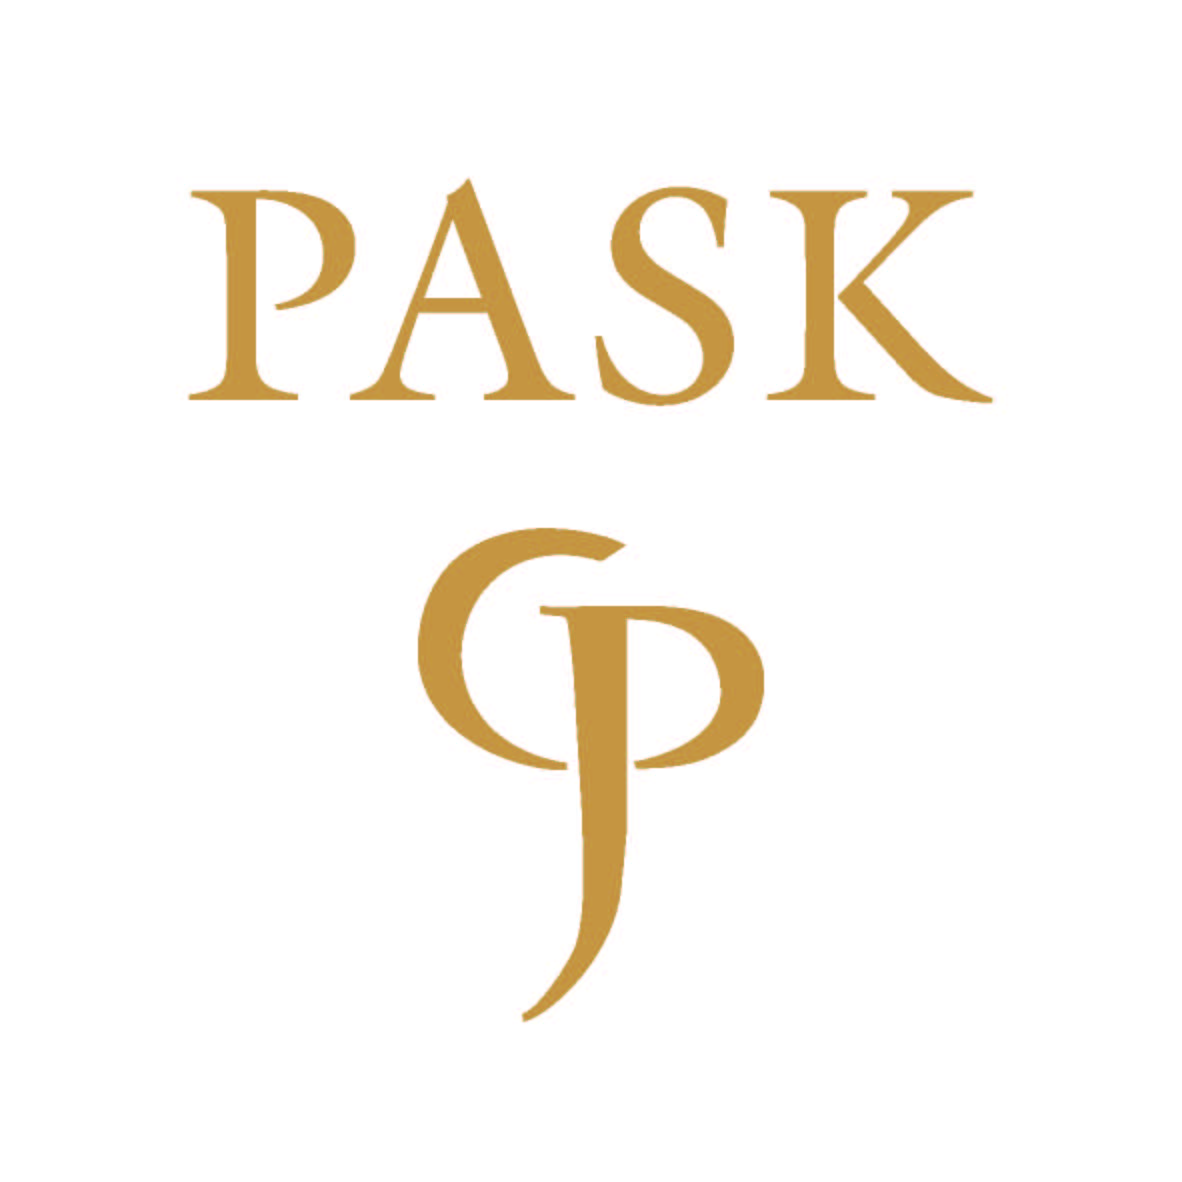 PASK_LOGO_2015 - gold only.jpg